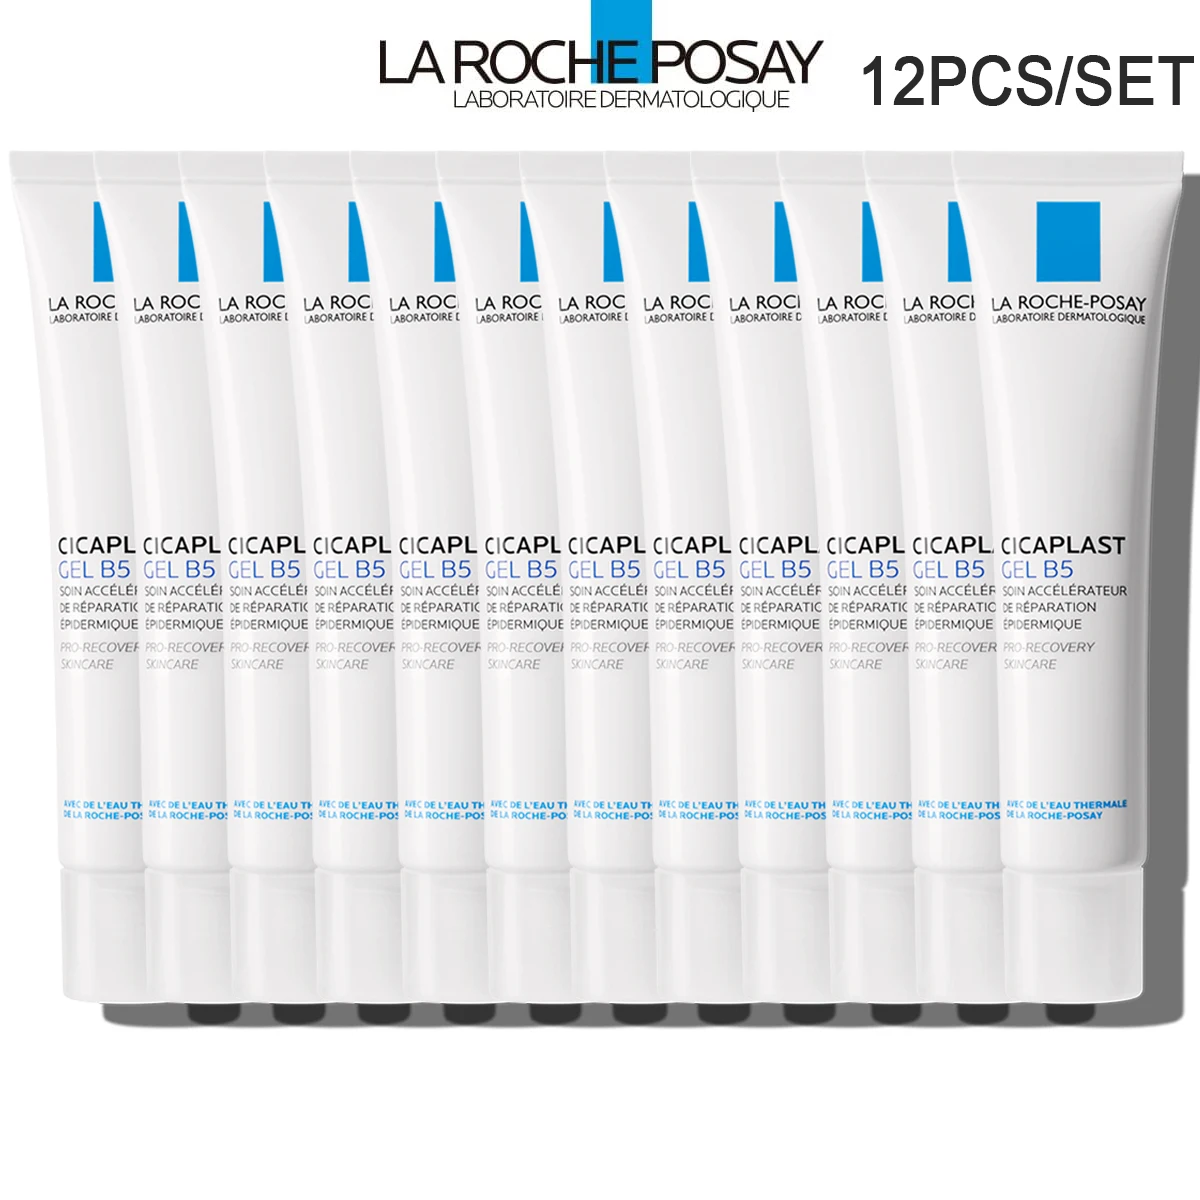 

12PCS La Roche Posay CICAPLAST GEL B5 EPIDERMAL Pro RECOVERY SKINCARE 40ml Face Cream For All Skin Types Vitamin B5 soothing